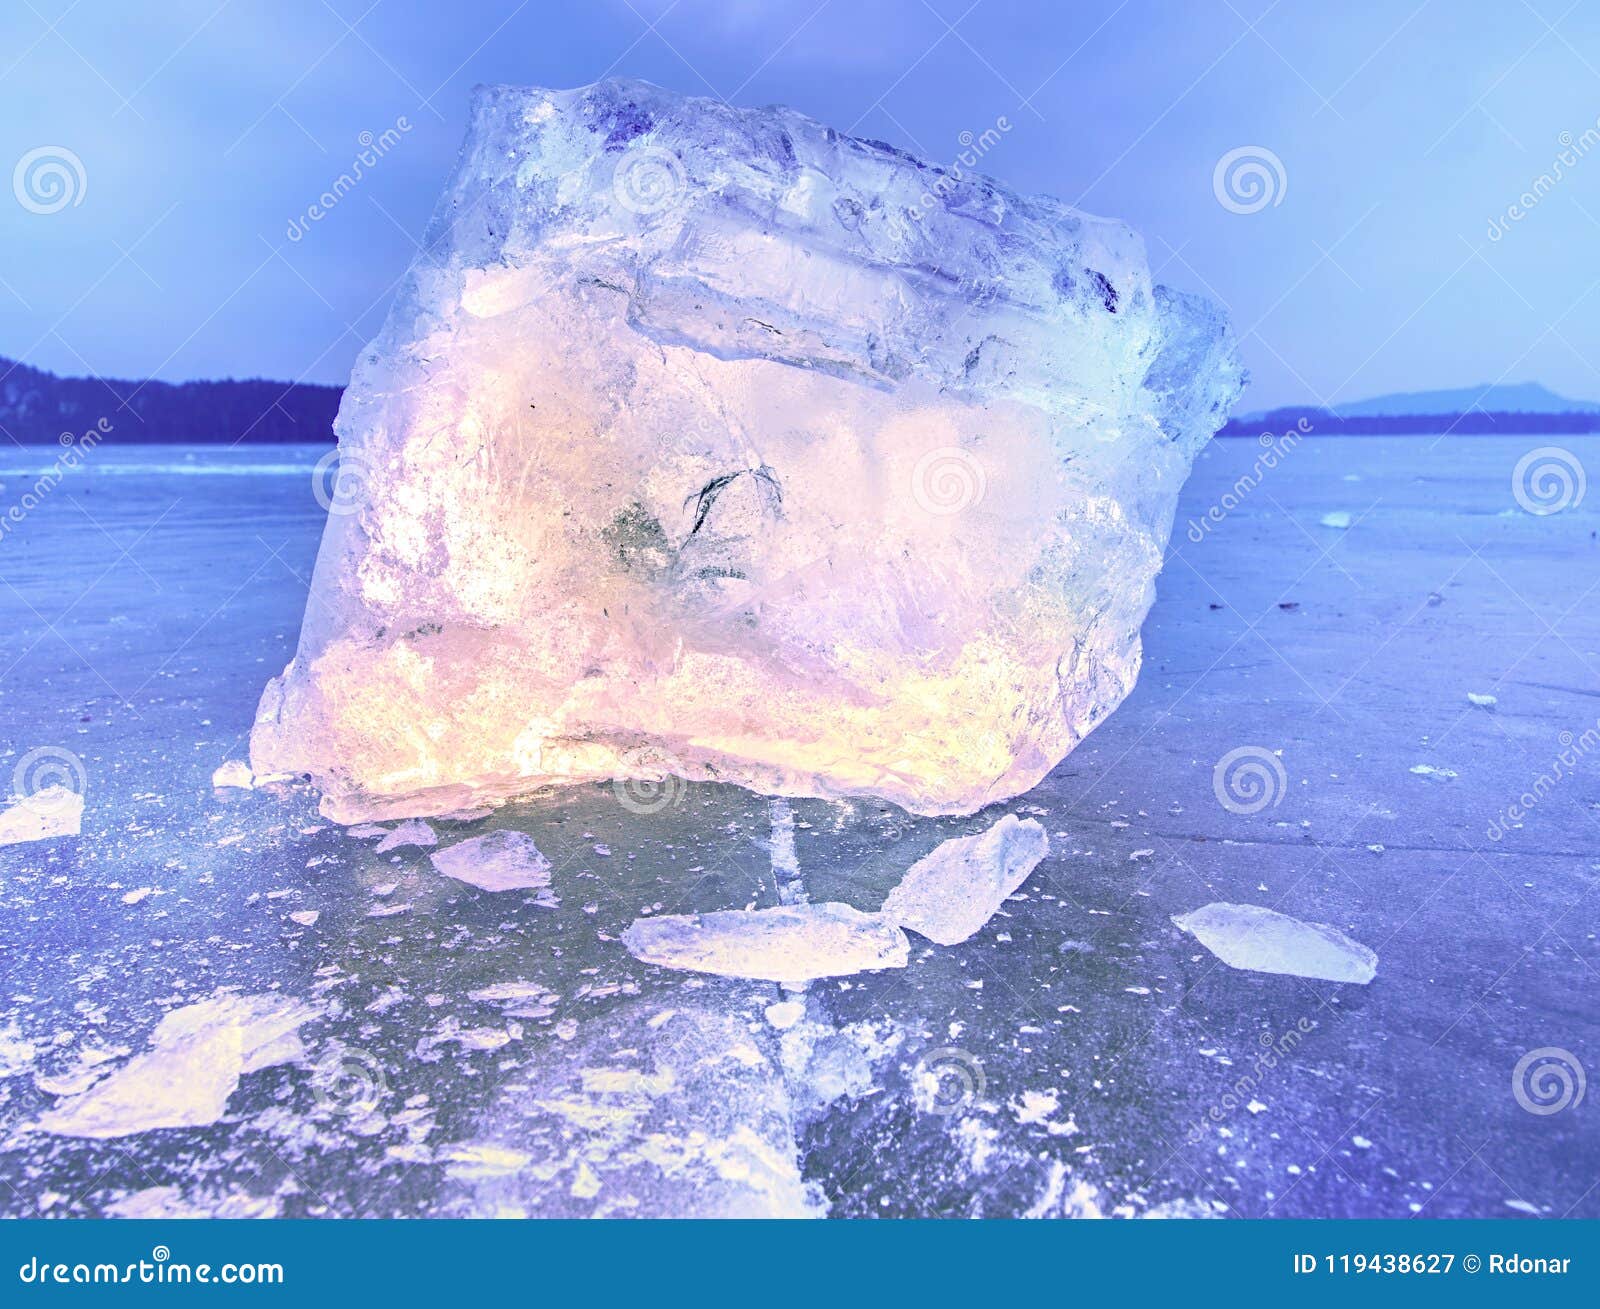 Blocks of Shining Ice and Snow on the Shore. the Floes and Crushed Ice ...